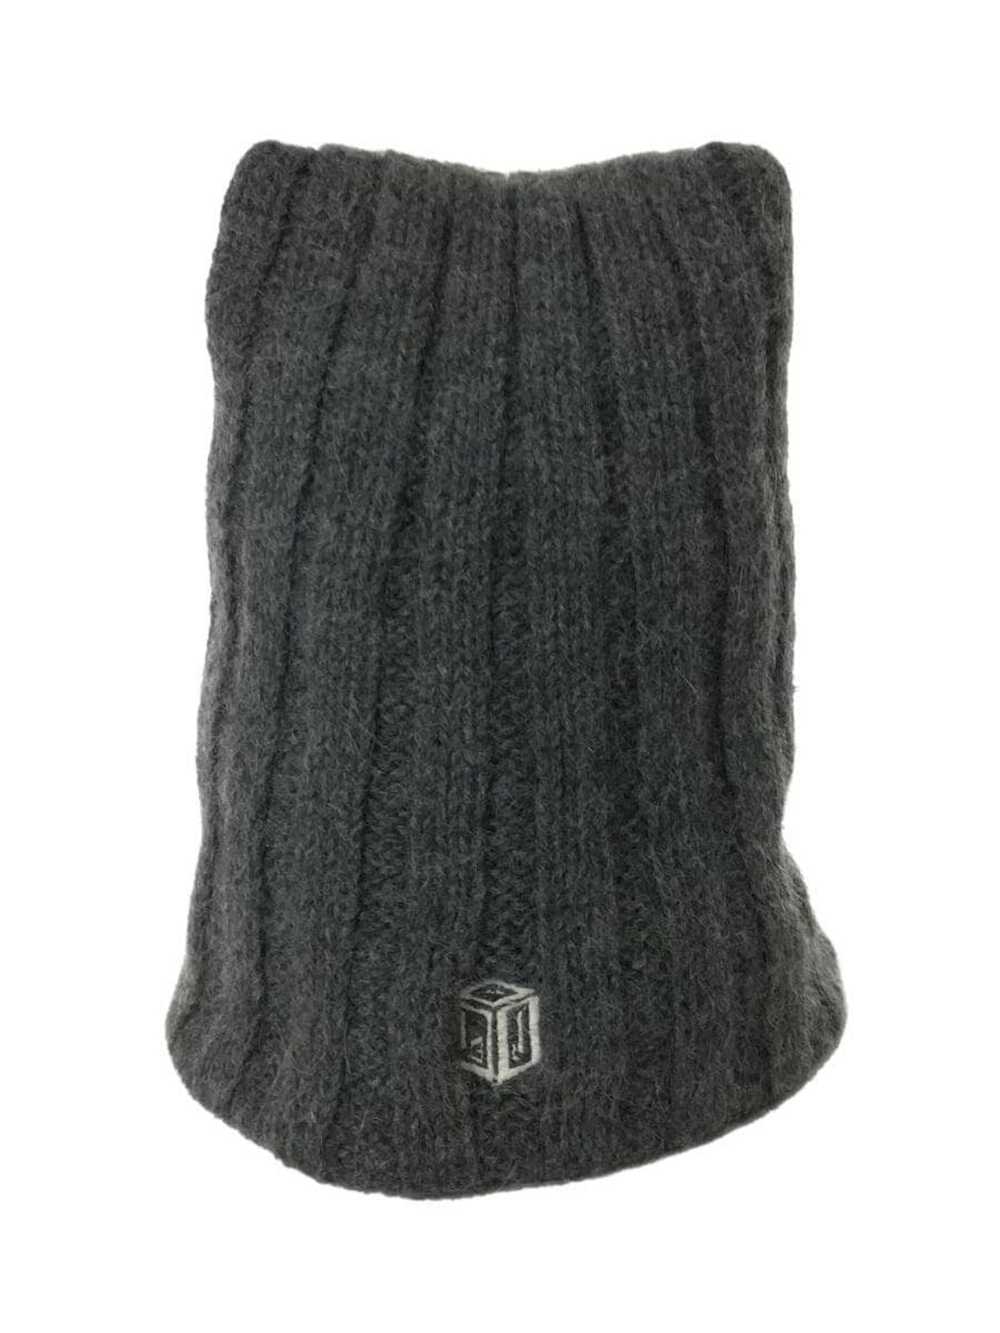 General Research 🐎 1998 Cube Wool Hat - image 1